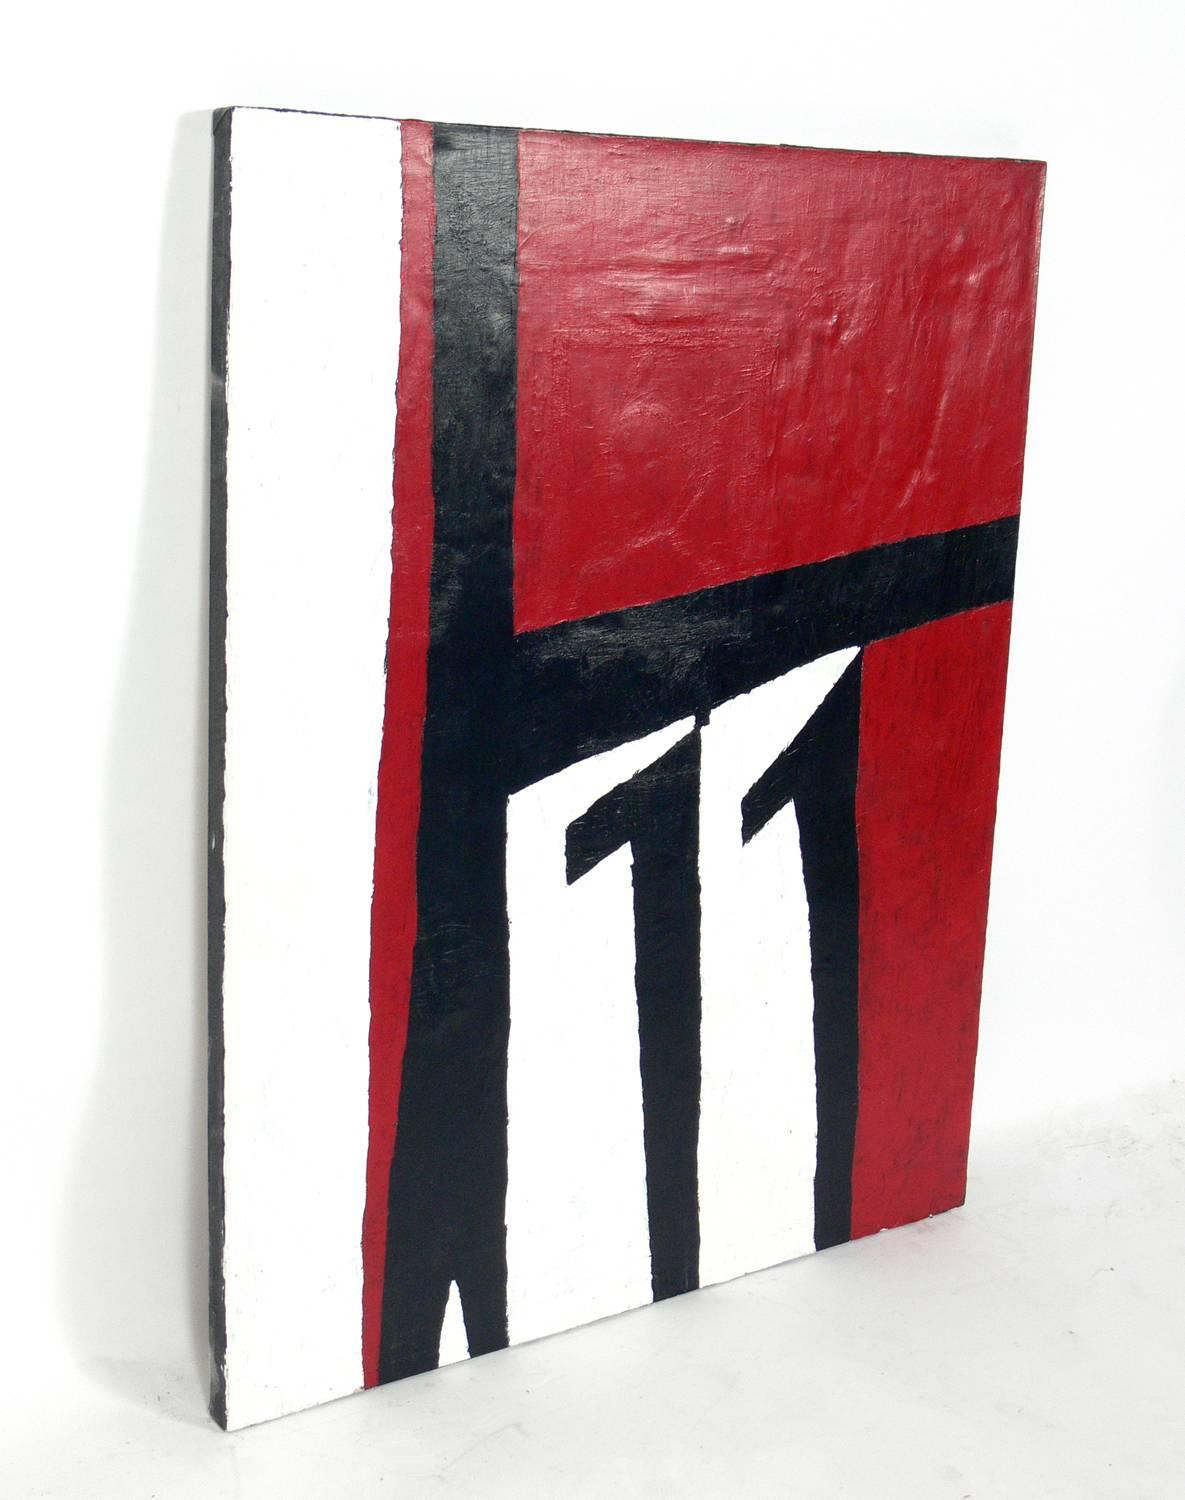 Abstract red and black painting with thick impasto texture, after Robert Motherwell, American, circa 1980s. The canvas is gallery wrapped around the edge of the stretcher and needs no frame. Bold graphic look.